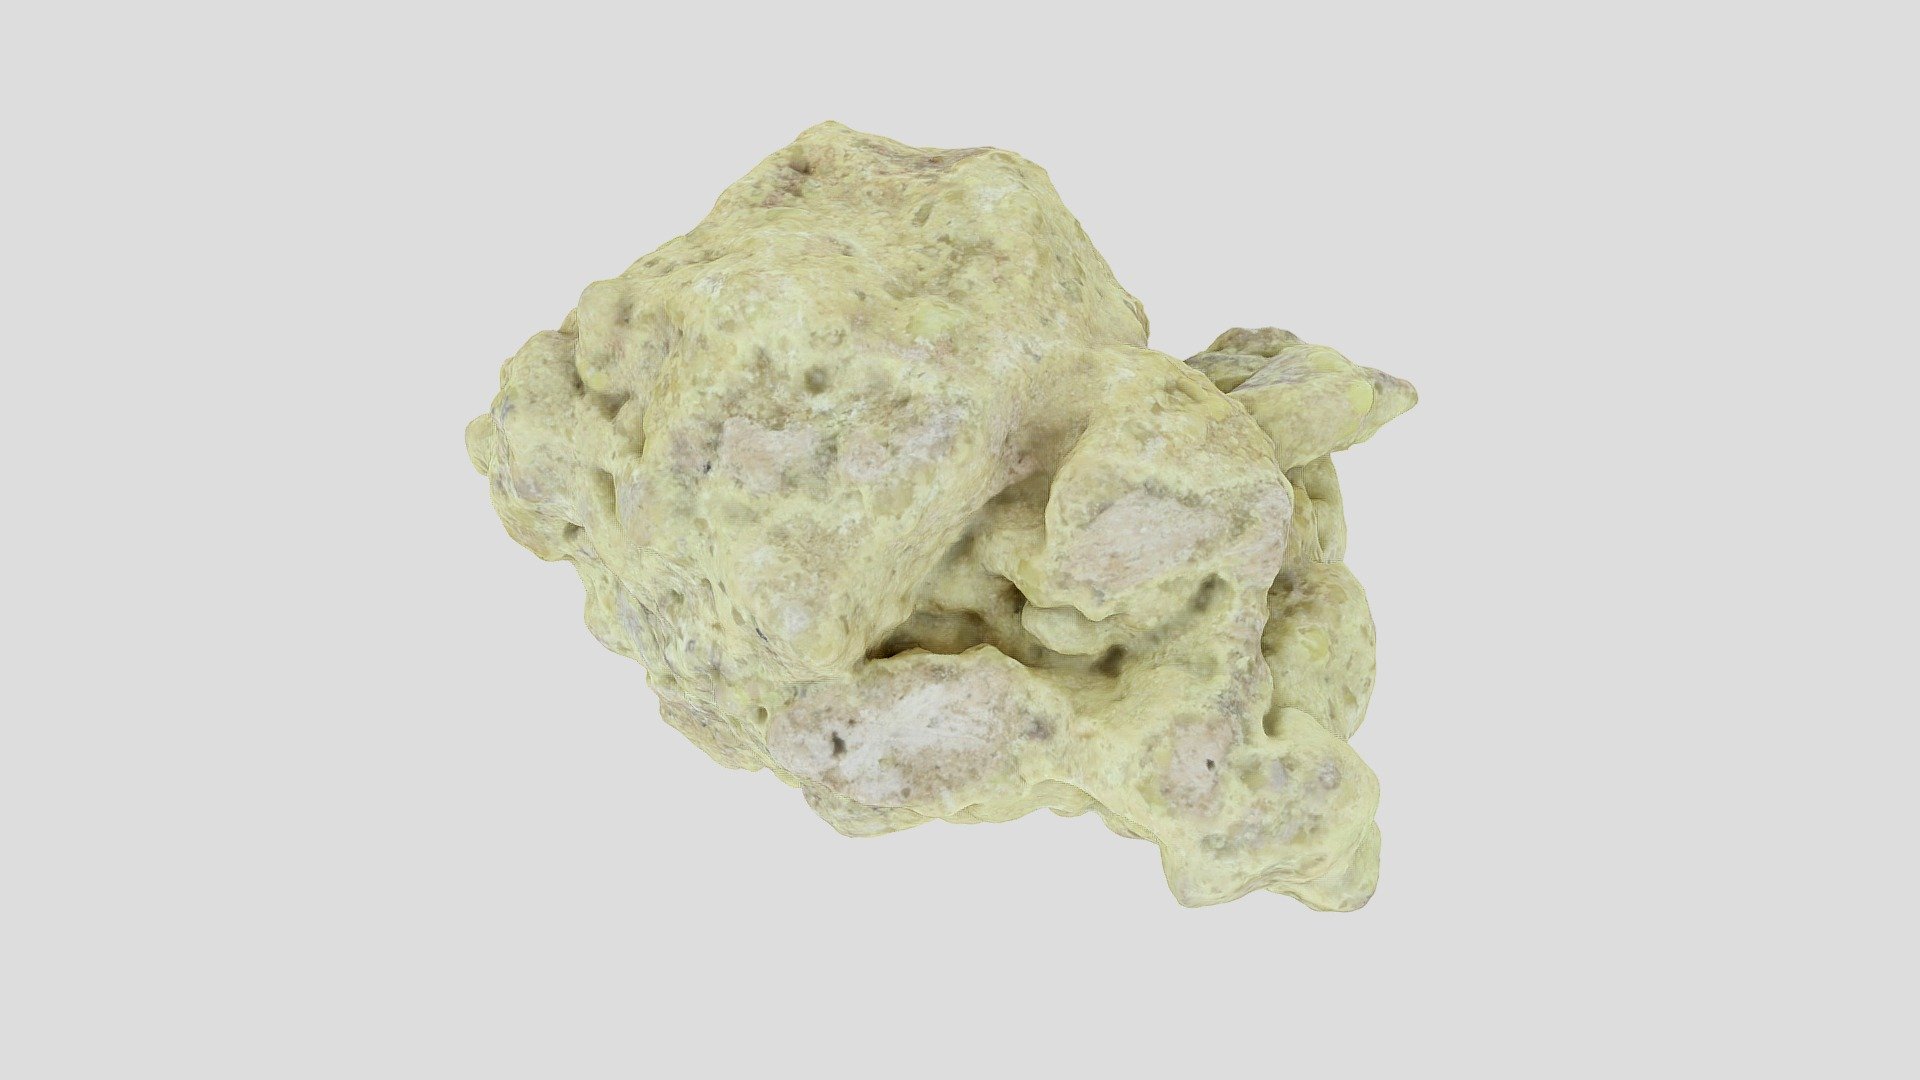 Sulfur is a chemical element, which at room temperature it is a yellow crystalline solid. Even though it is insoluble in water, it is one of the most versatile elements at forming compounds. 

Sulfur is abundant and occurs throughout the Universe, but it is rarely found in a pure, uncombined form at Earth's surface. As an element, sulfur is an important constituent of sulfate and sulfide minerals. It occurs in the dissolved ions of many waters. It is an important constituent of many atmospheric, subsurface, and dissolved gases. It is an essential element in all living things and is in the organic molecules of all fossil fuels.

As a mineral, sulfur is a bright yellow crystalline material. It forms near volcanic vents and fumaroles, where it sublimates from a stream of hot gases. Small amounts of native sulfur also form during the weathering of sulfate and sulfide minerals.

https://www.mindat.org/min-3826.html

https://geology.com/minerals/sulfur.shtml - Sulfur - Download Free 3D model by EDUROCK – EDUCATIONAL VIRTUAL ROCK COLLECTION (@EDUROCK_AALTO) 3d model